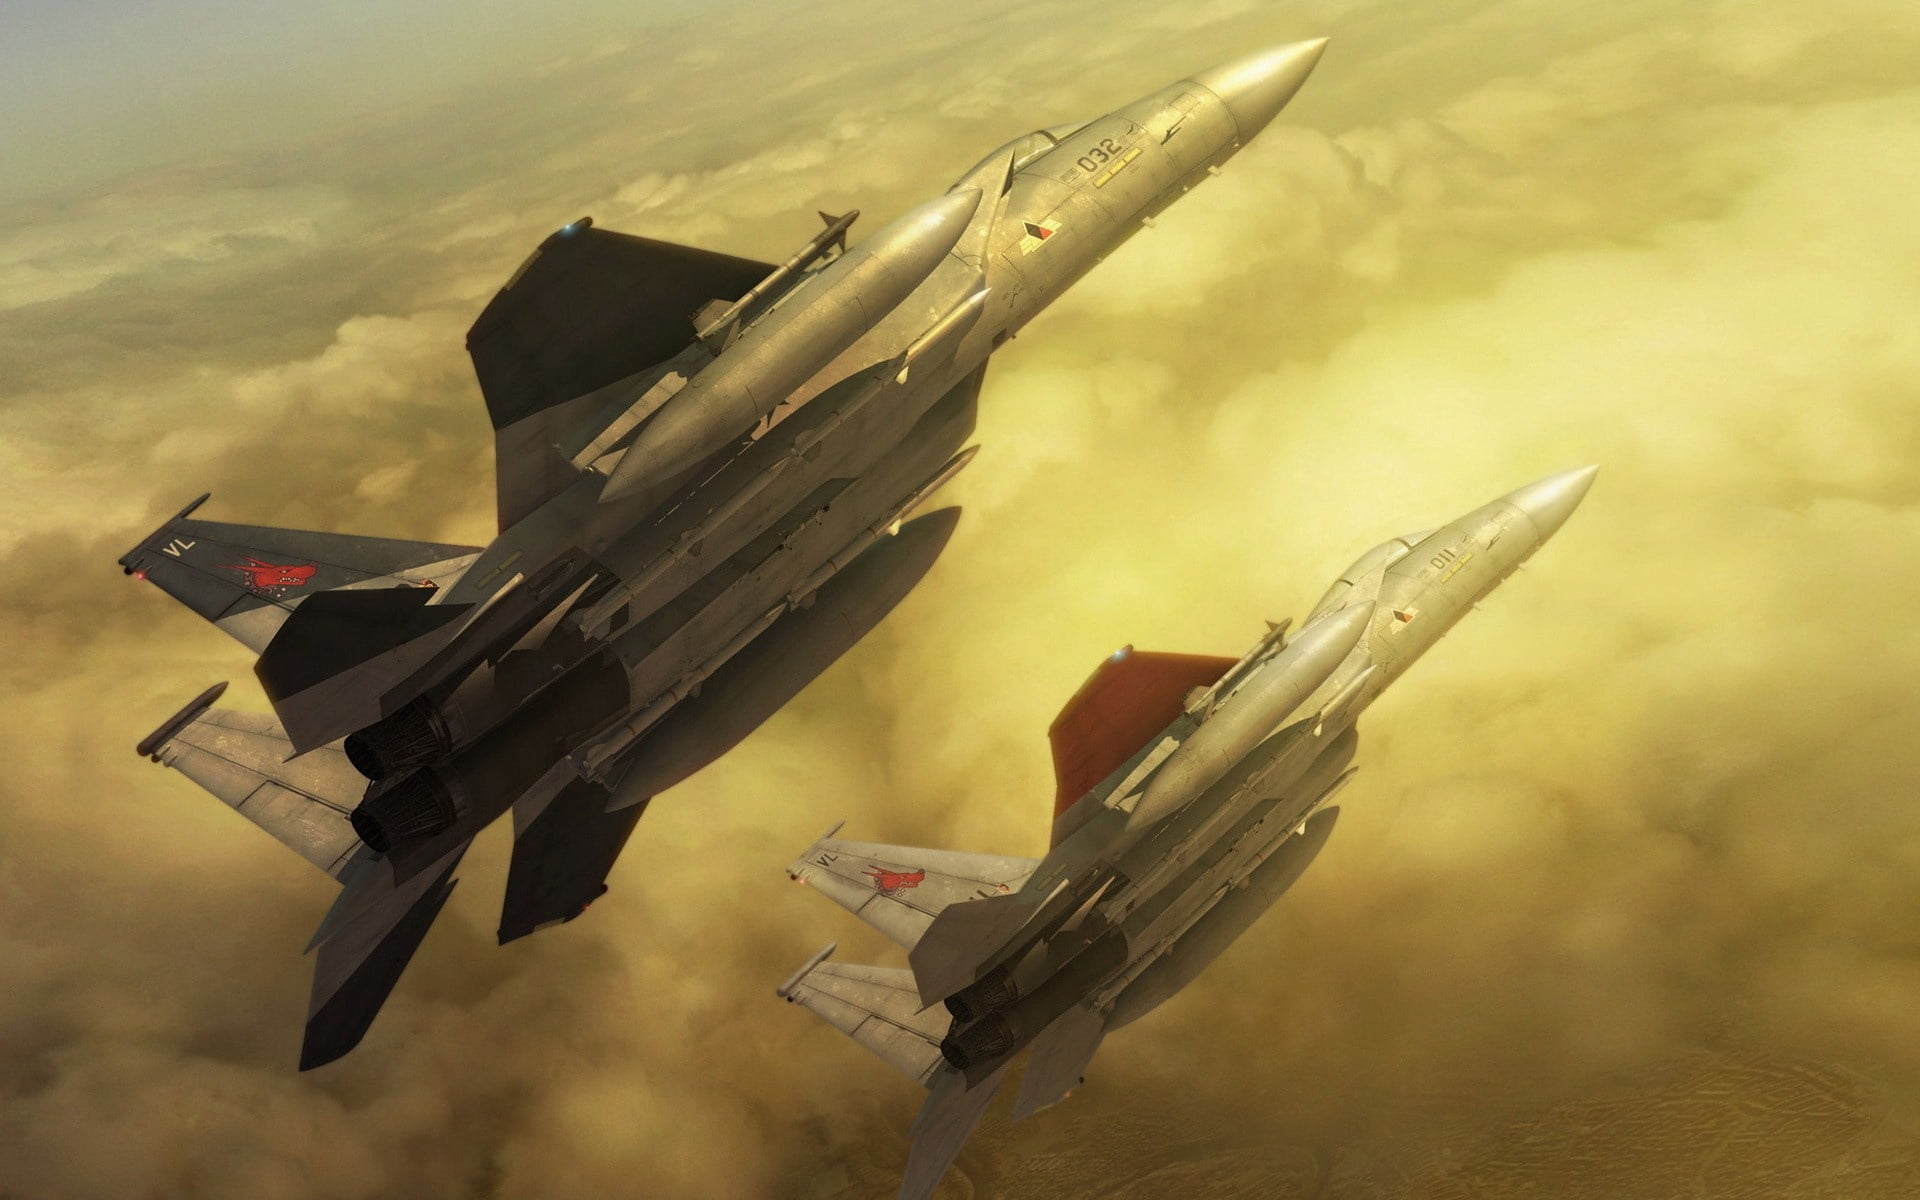 two black and gray jet planes, ace combat, fighters, clouds, sunlight